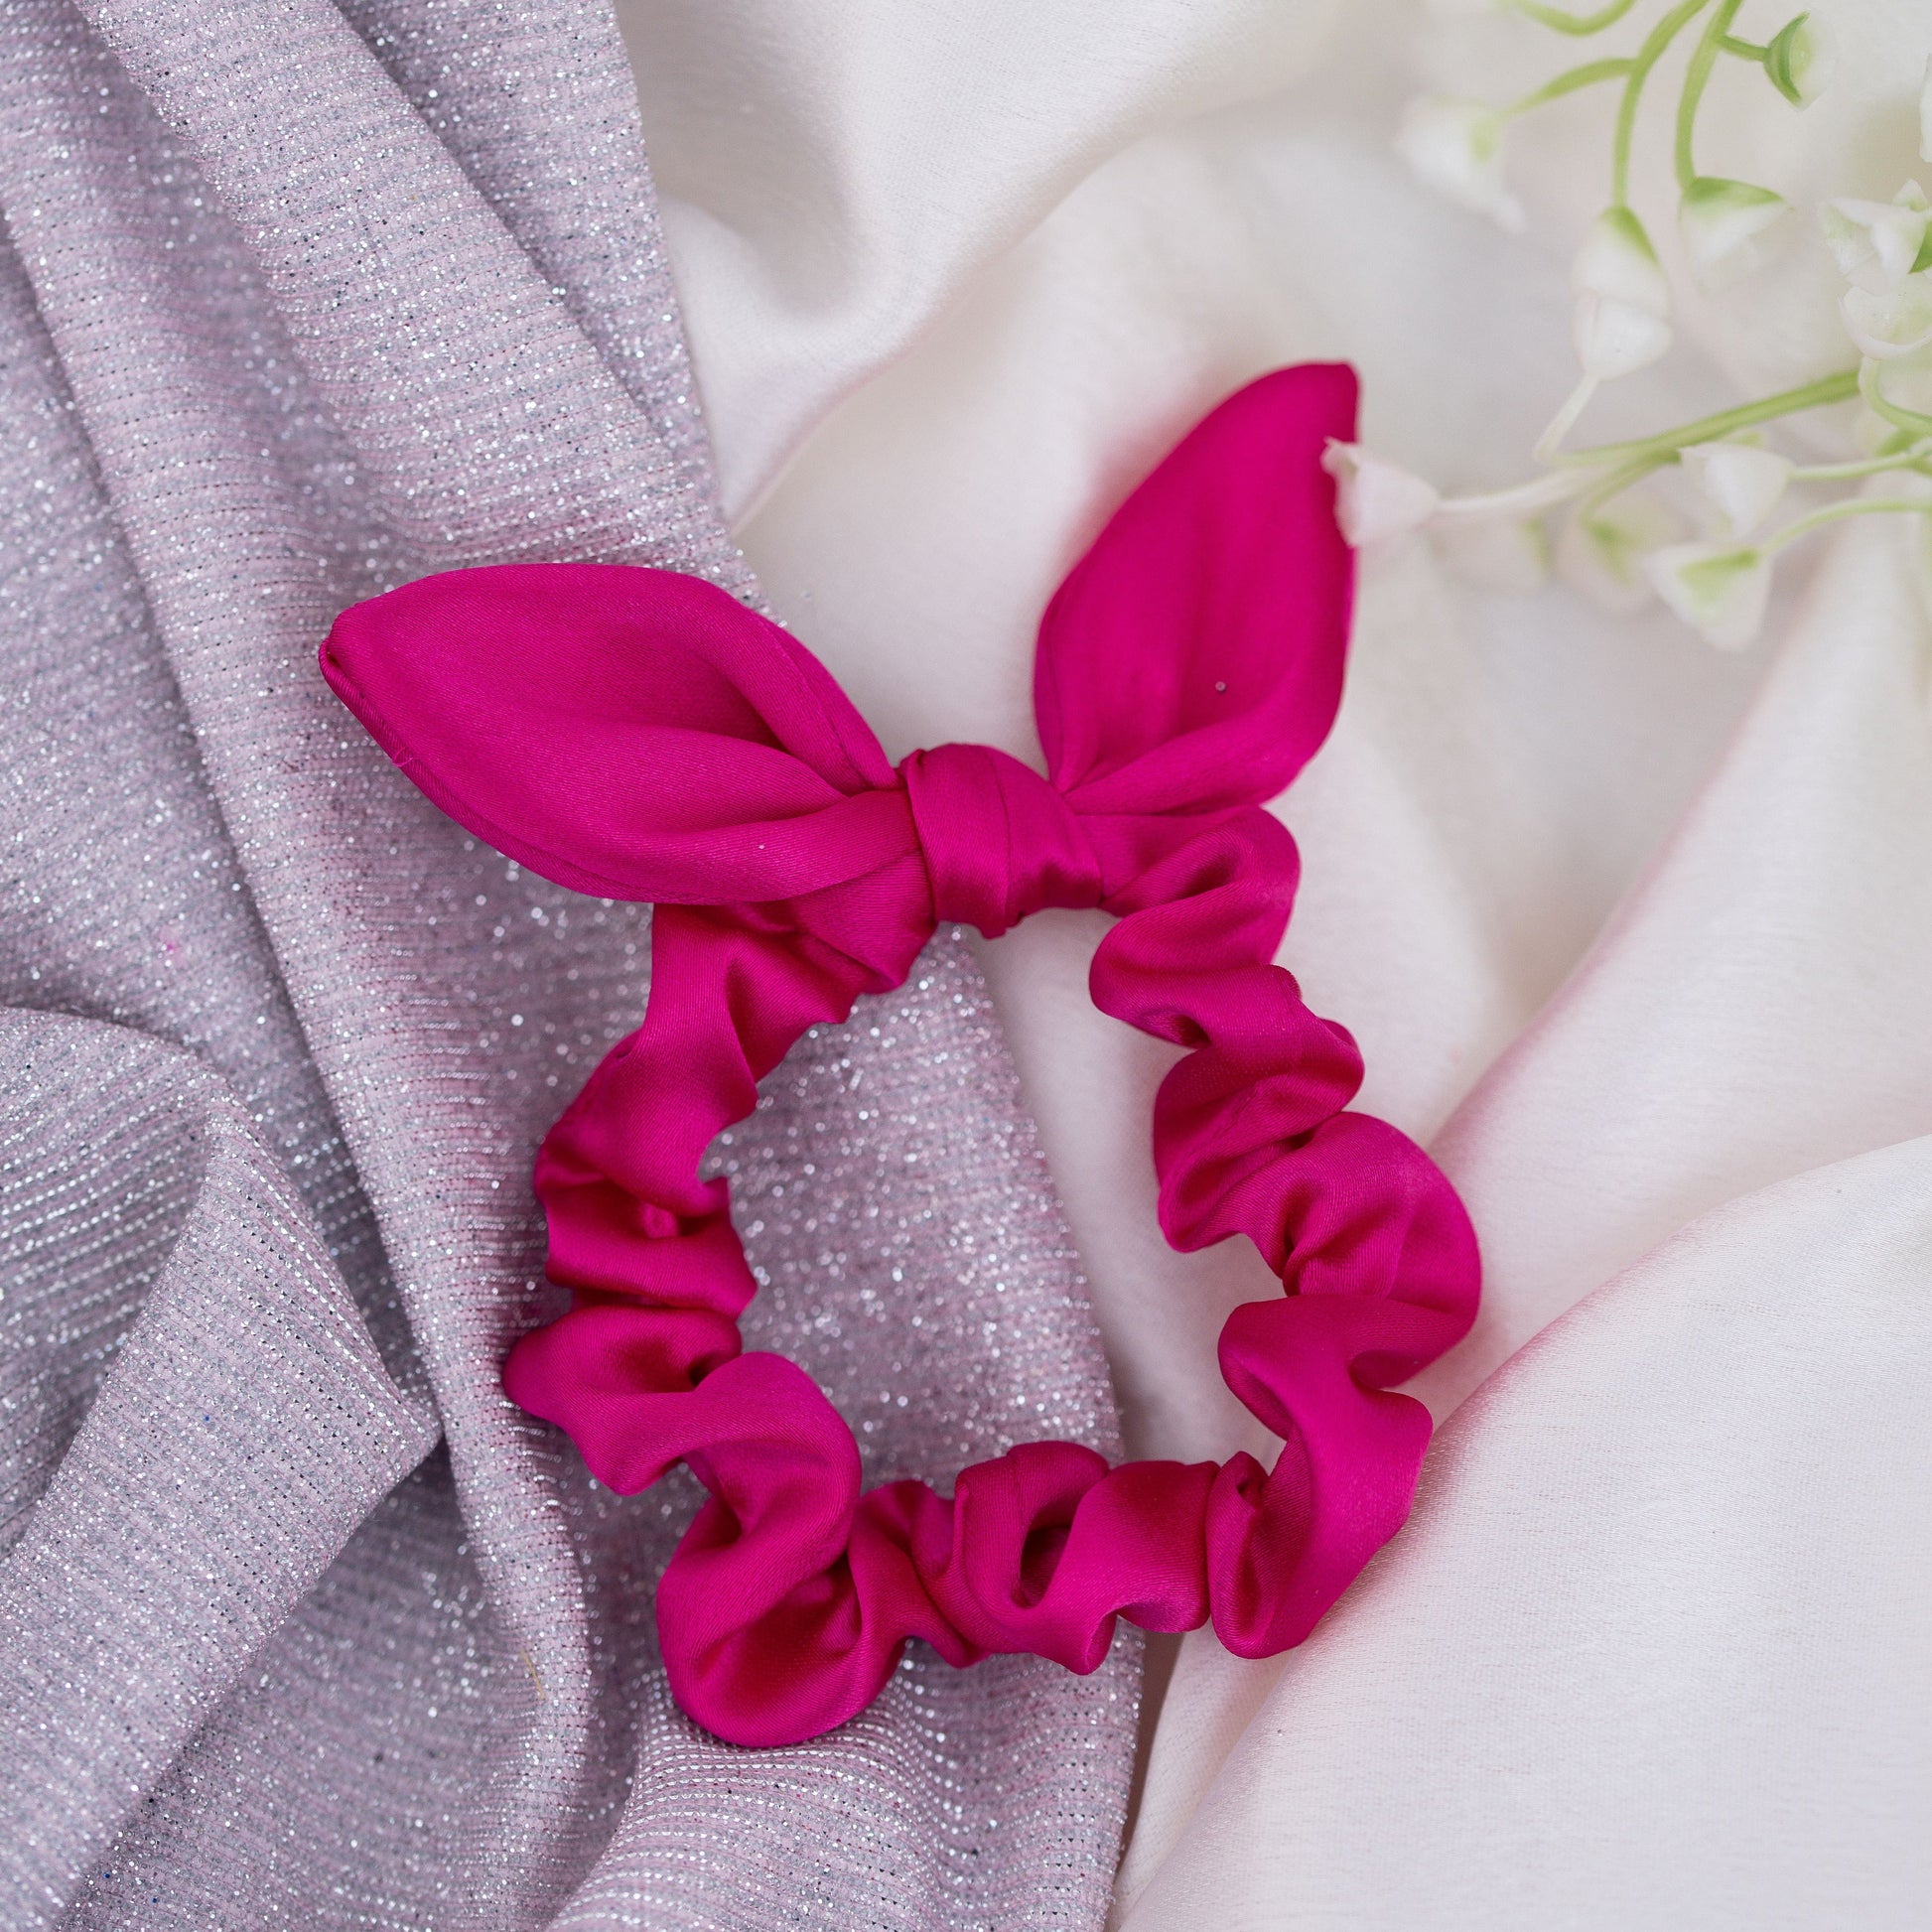 Ribbon Candy - Satin Scrunchie With Tie Knot Detail - Hot Pink